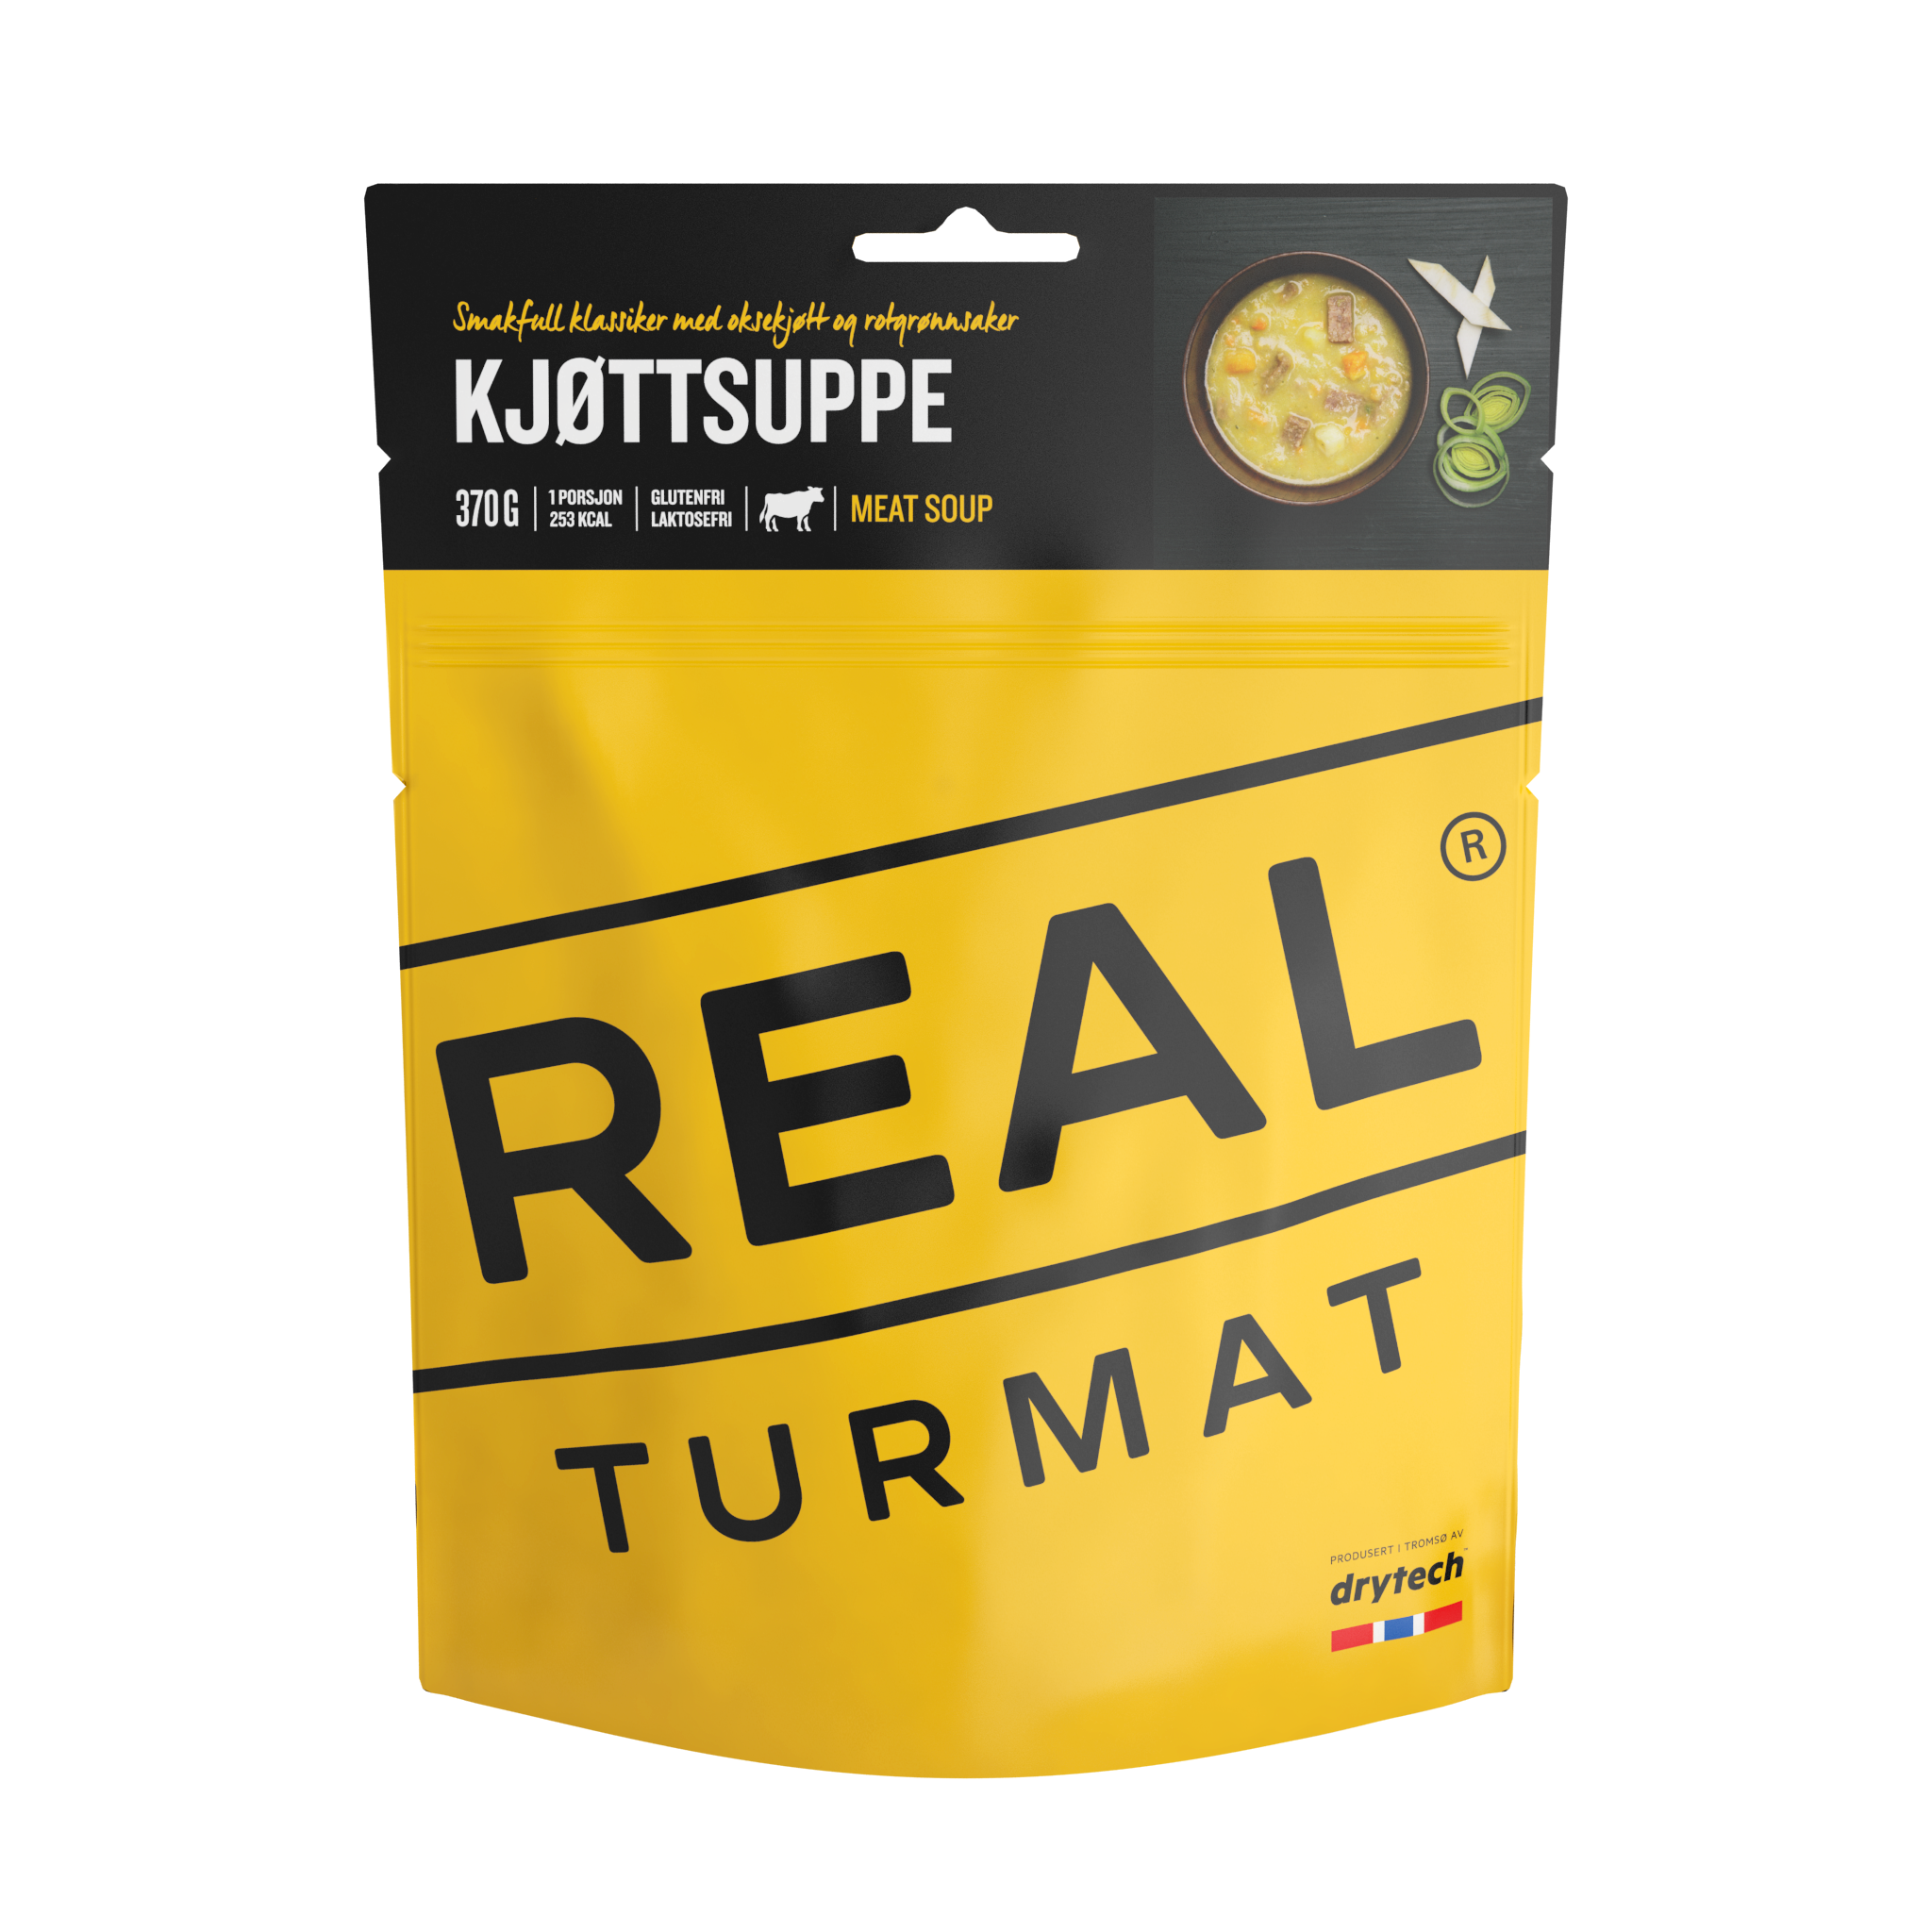 REAL TURMAT Rindfleischsuppe